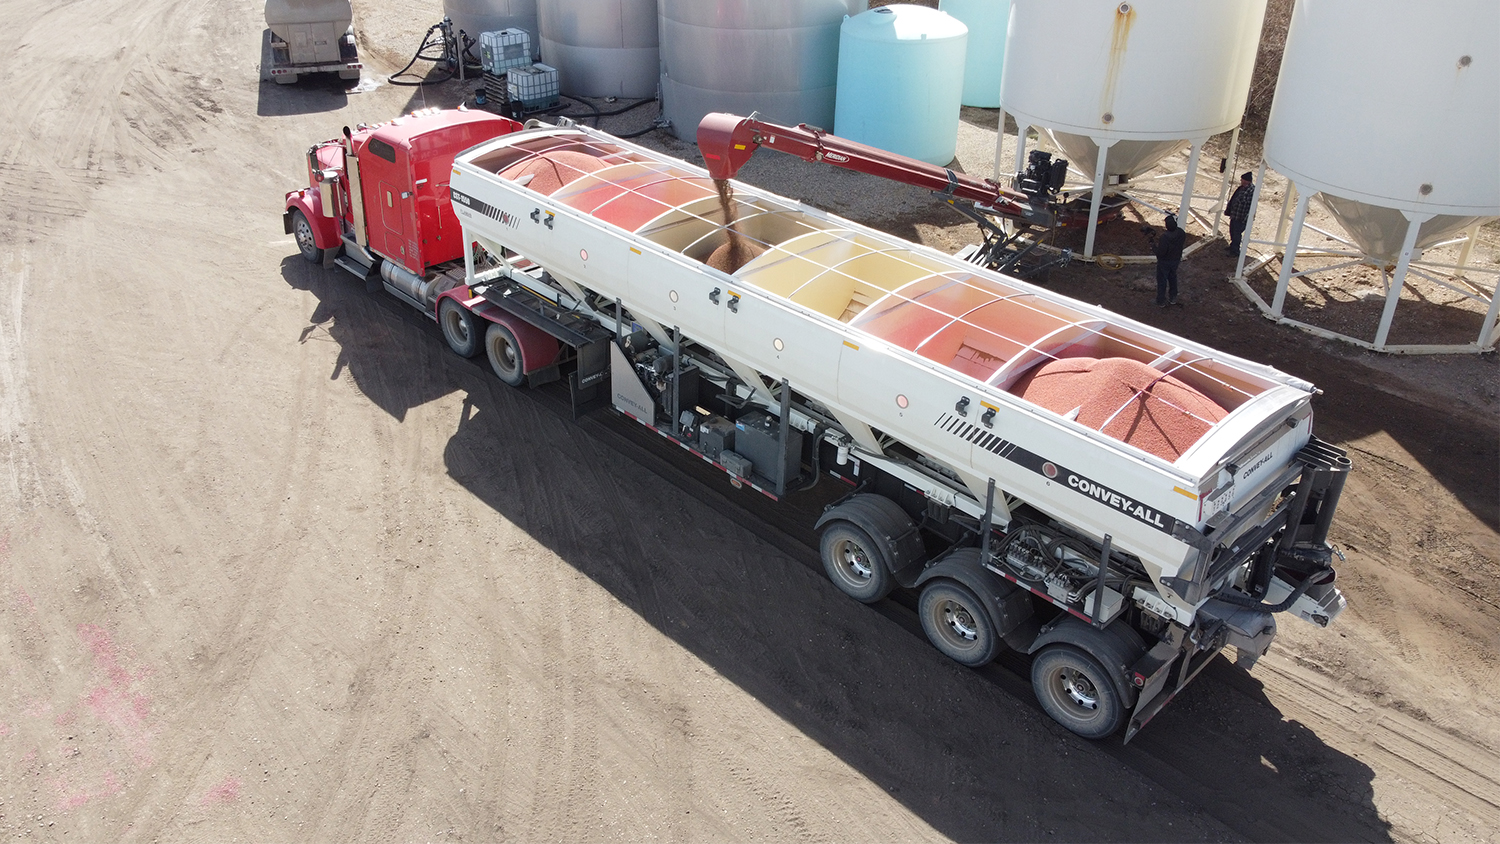 Convey-All Seed Tender being loaded with seed